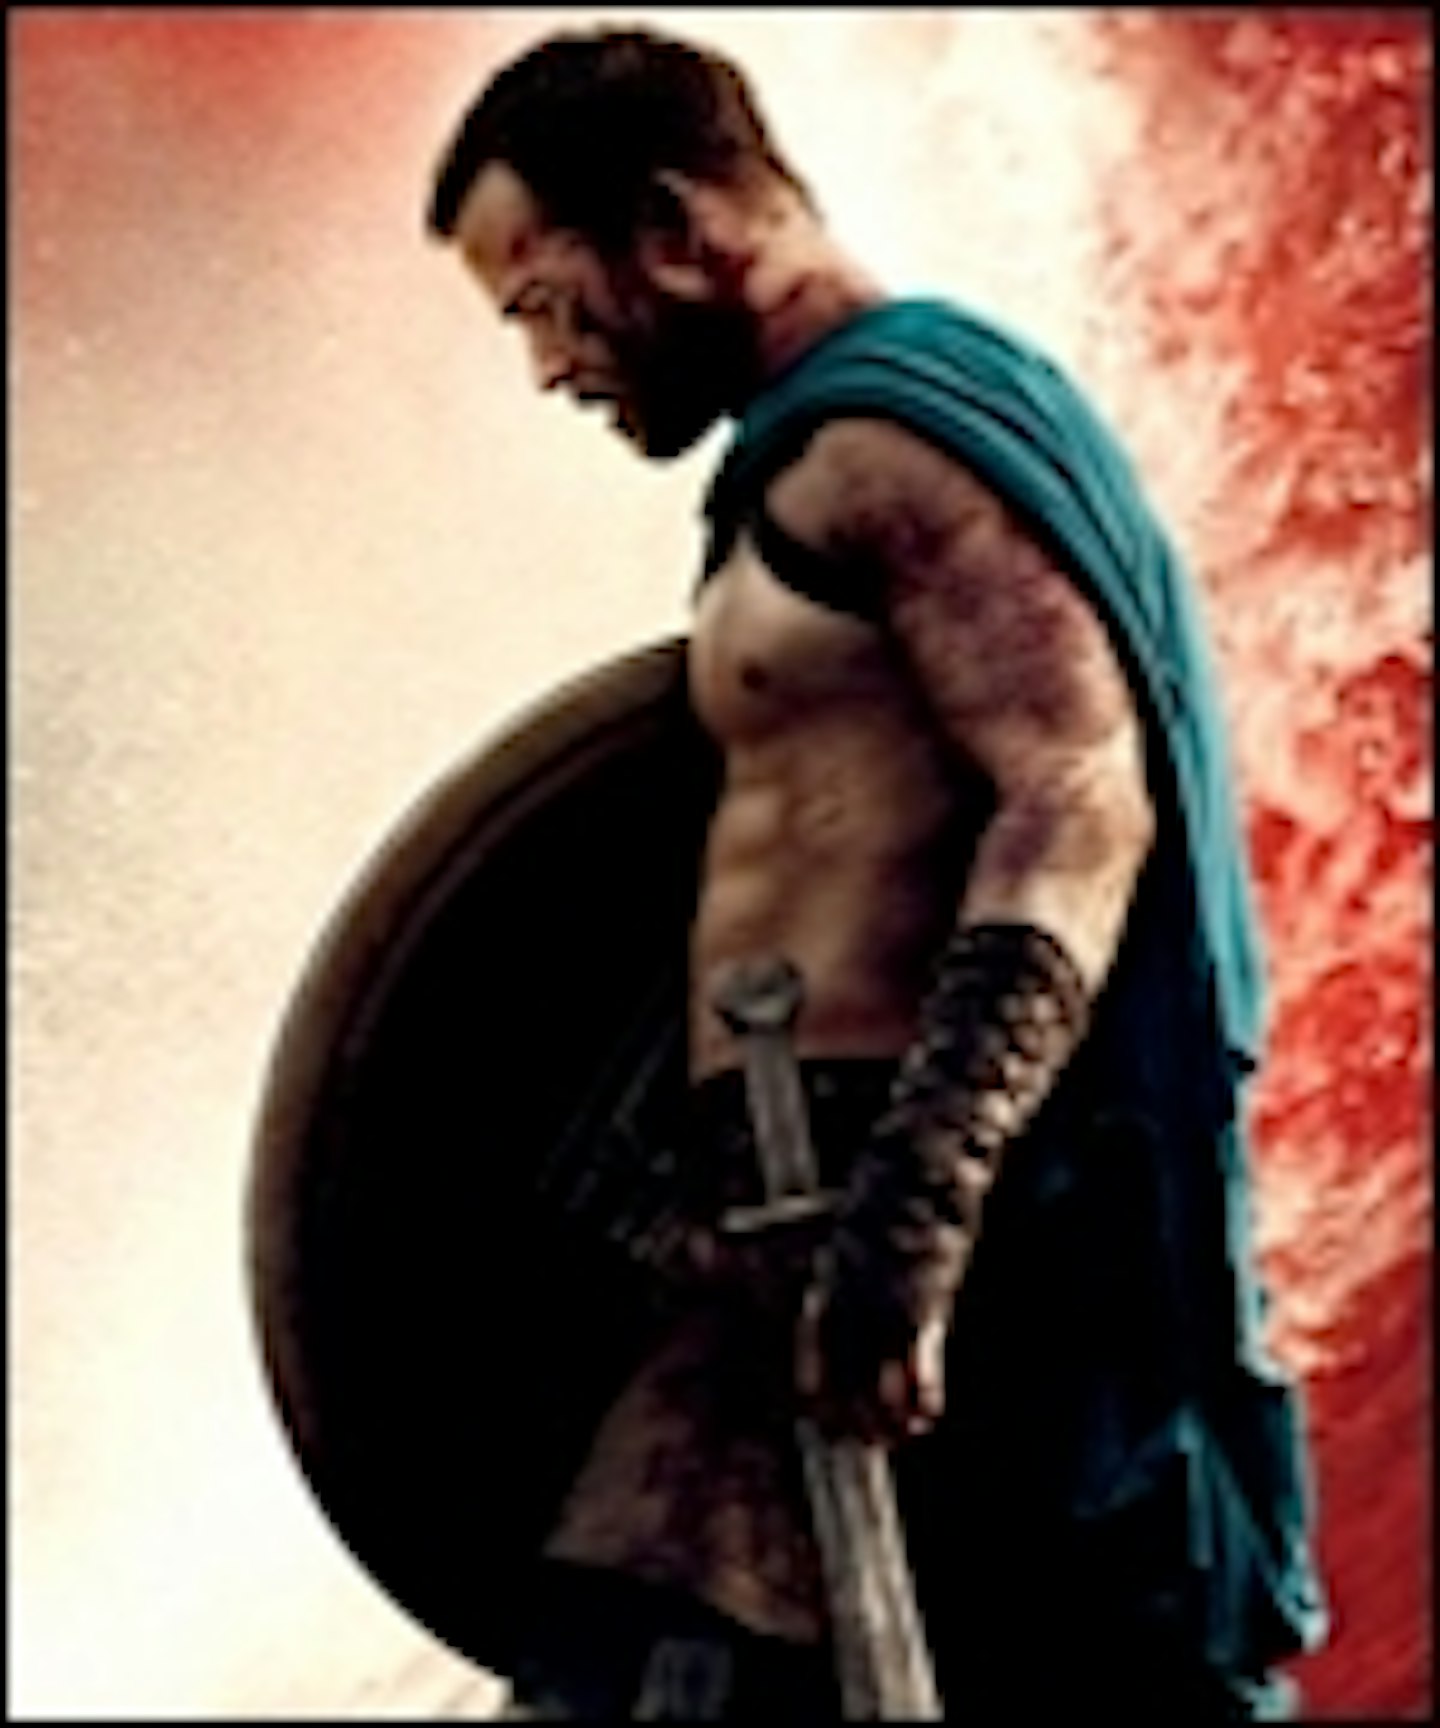 Latest 300: Rise Of An Empire Poster